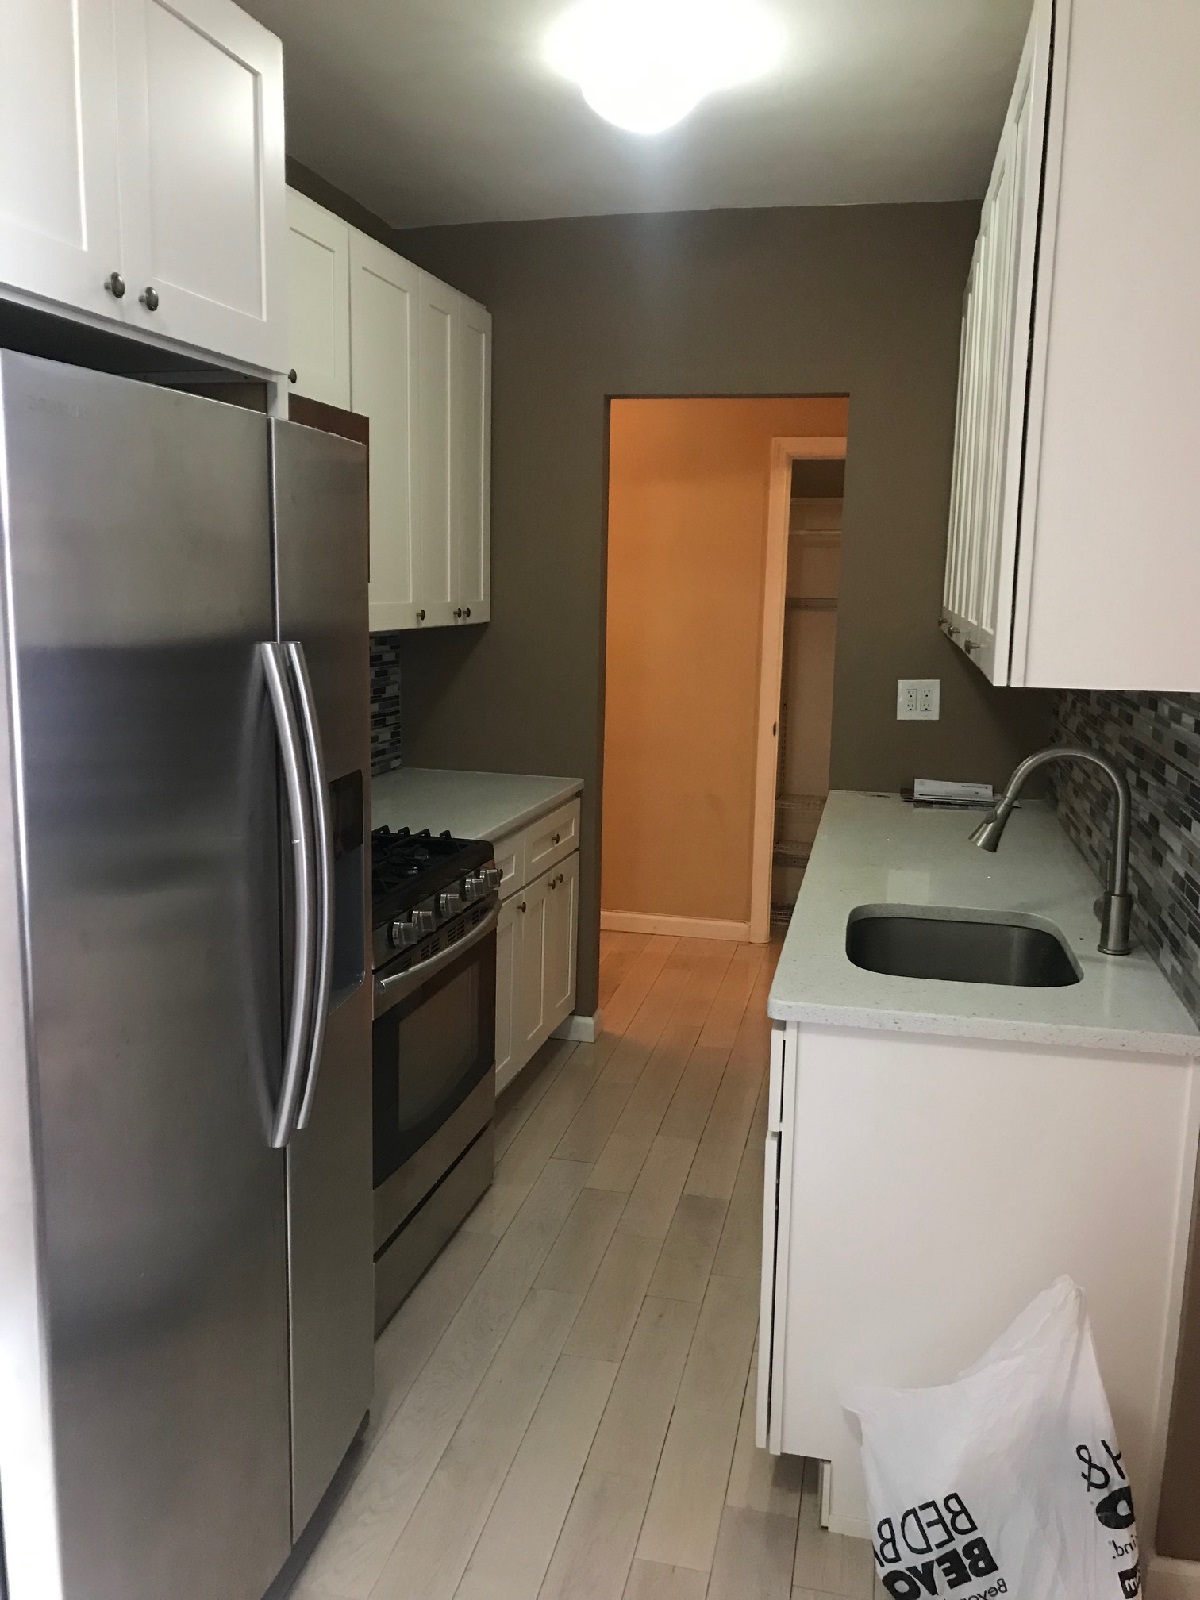 Apartment in Rego Park - Saunders  Queens, NY 11374